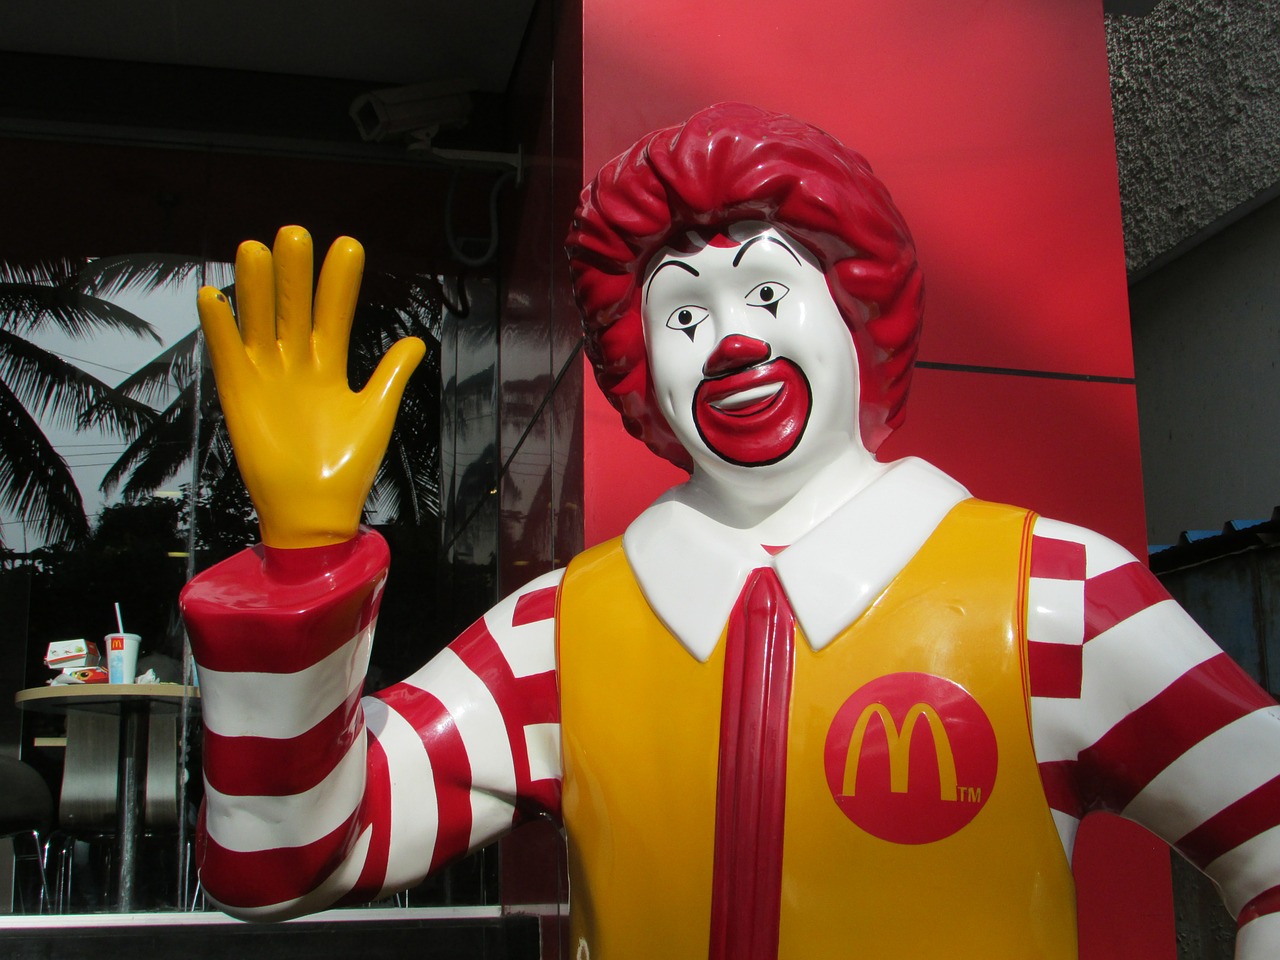 New McDonalds Campaign Leaves Customers Speechless